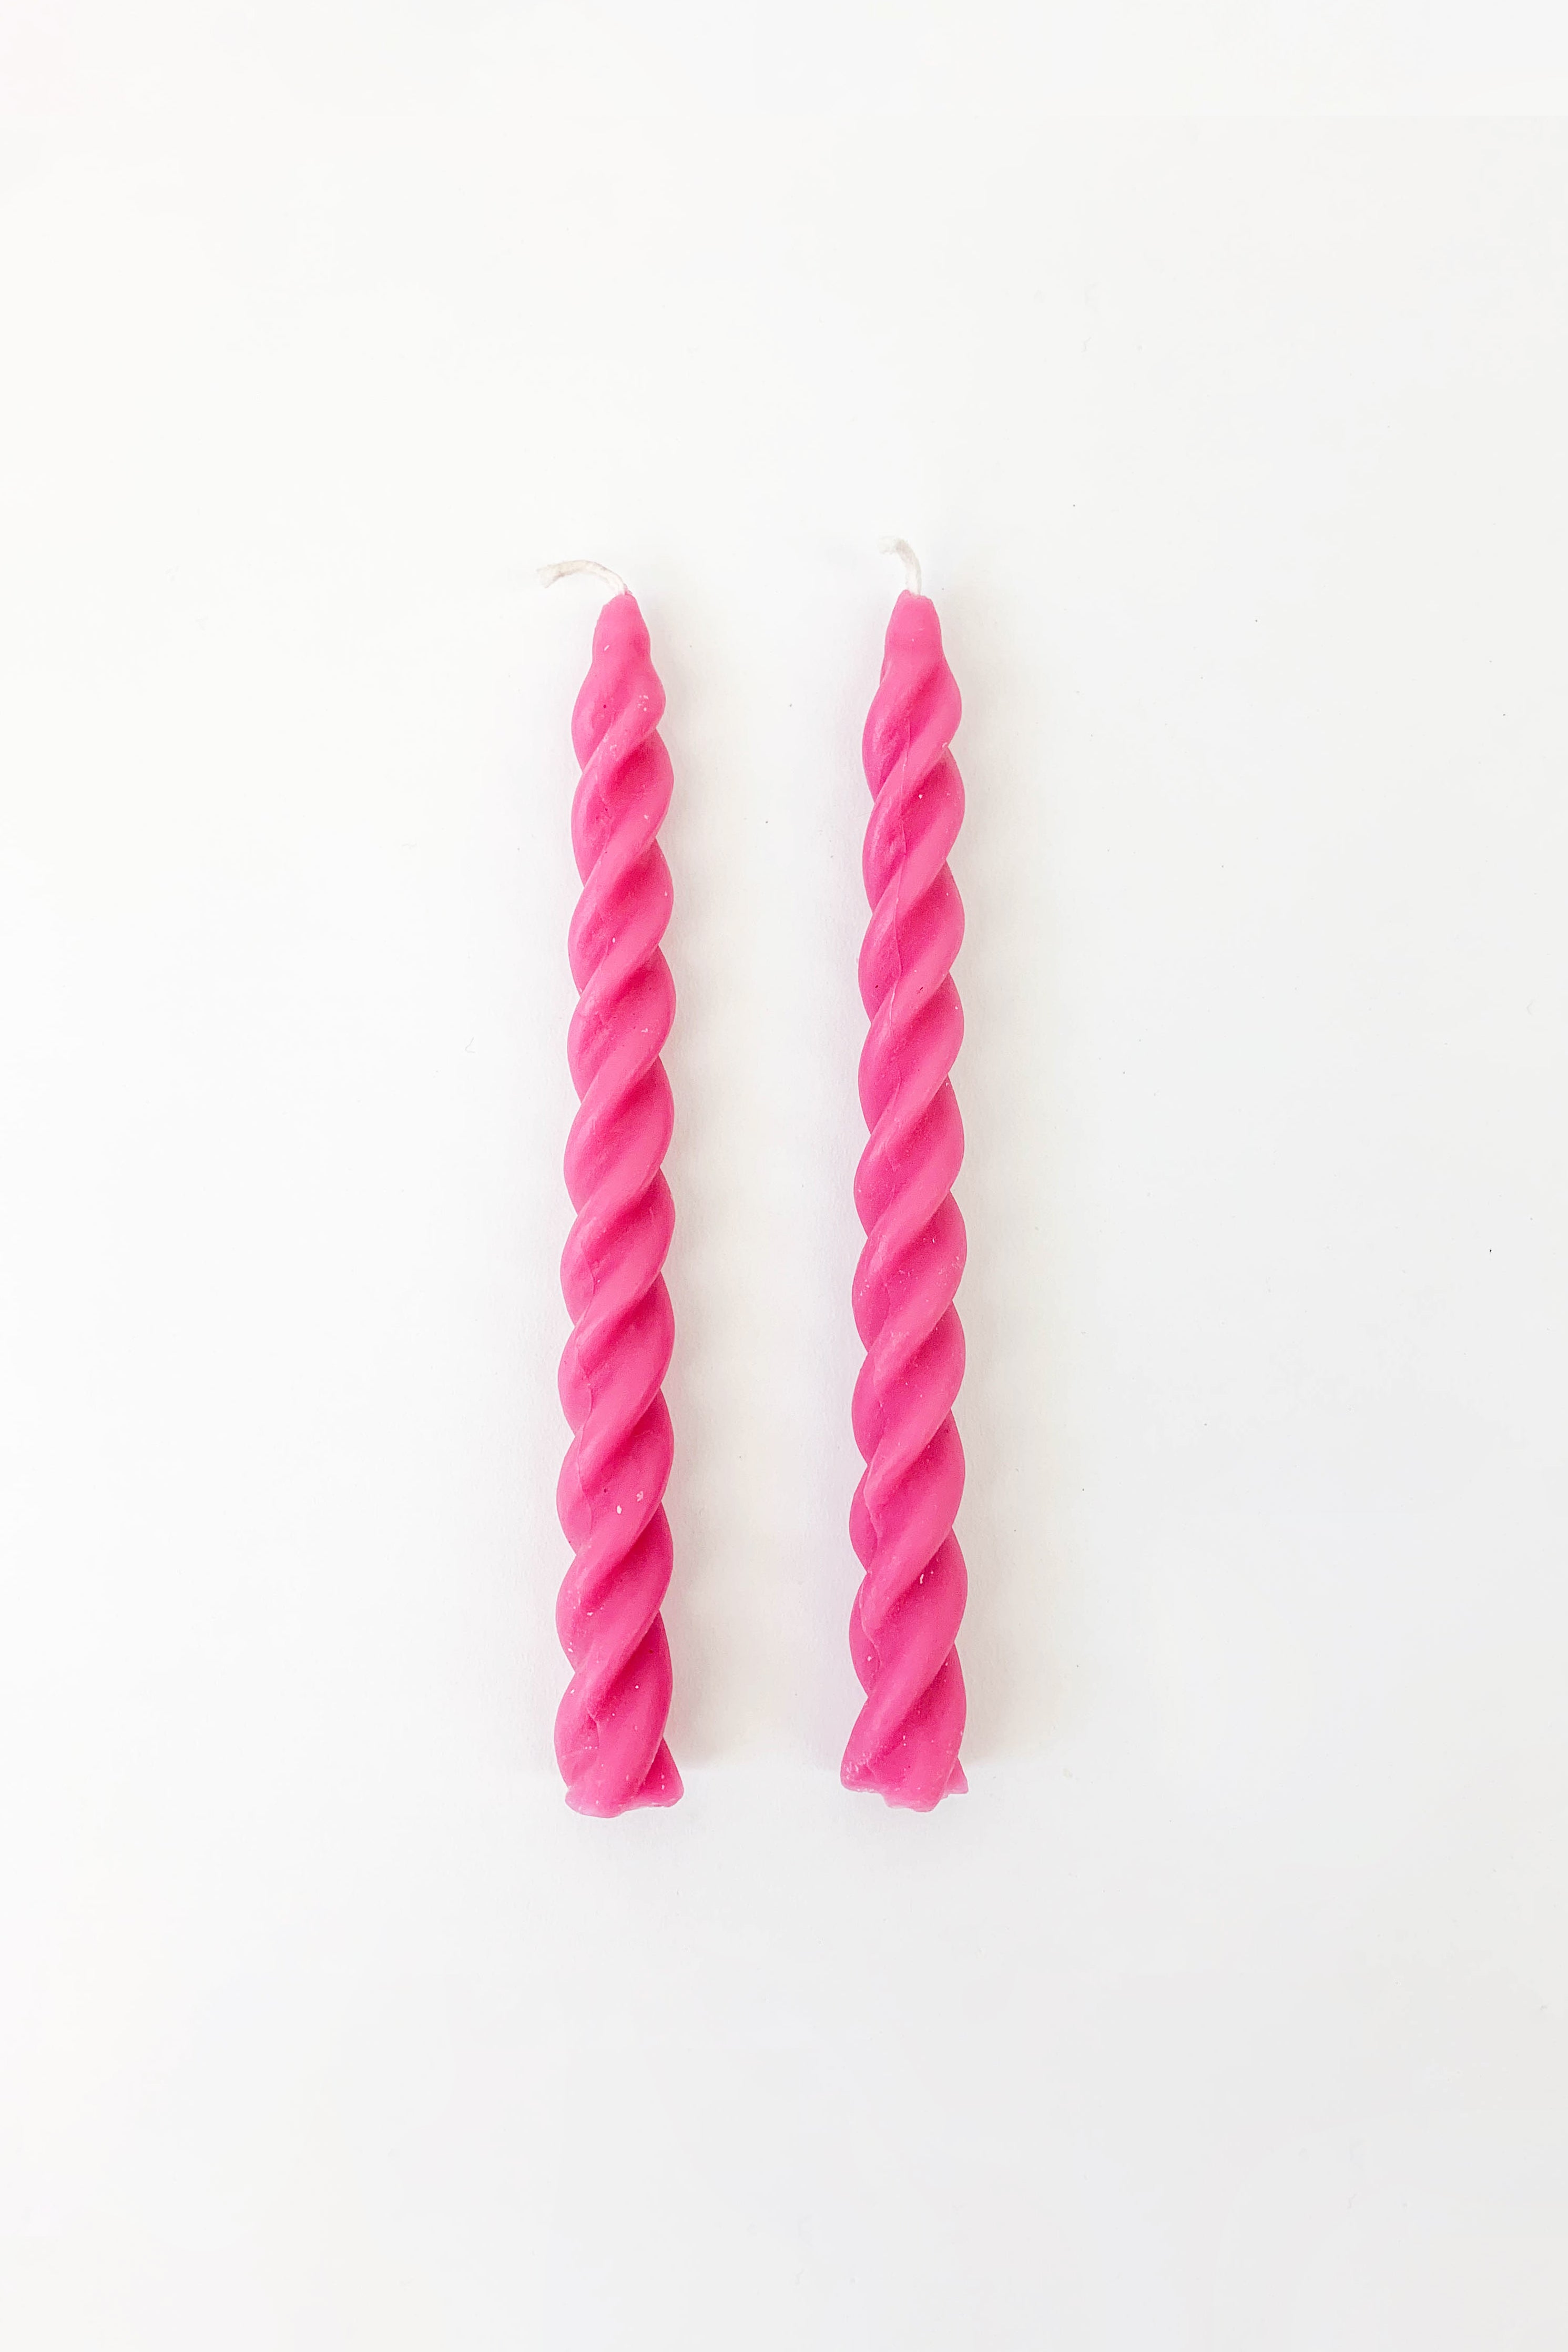 Twisted Taper Candle in Raspberry